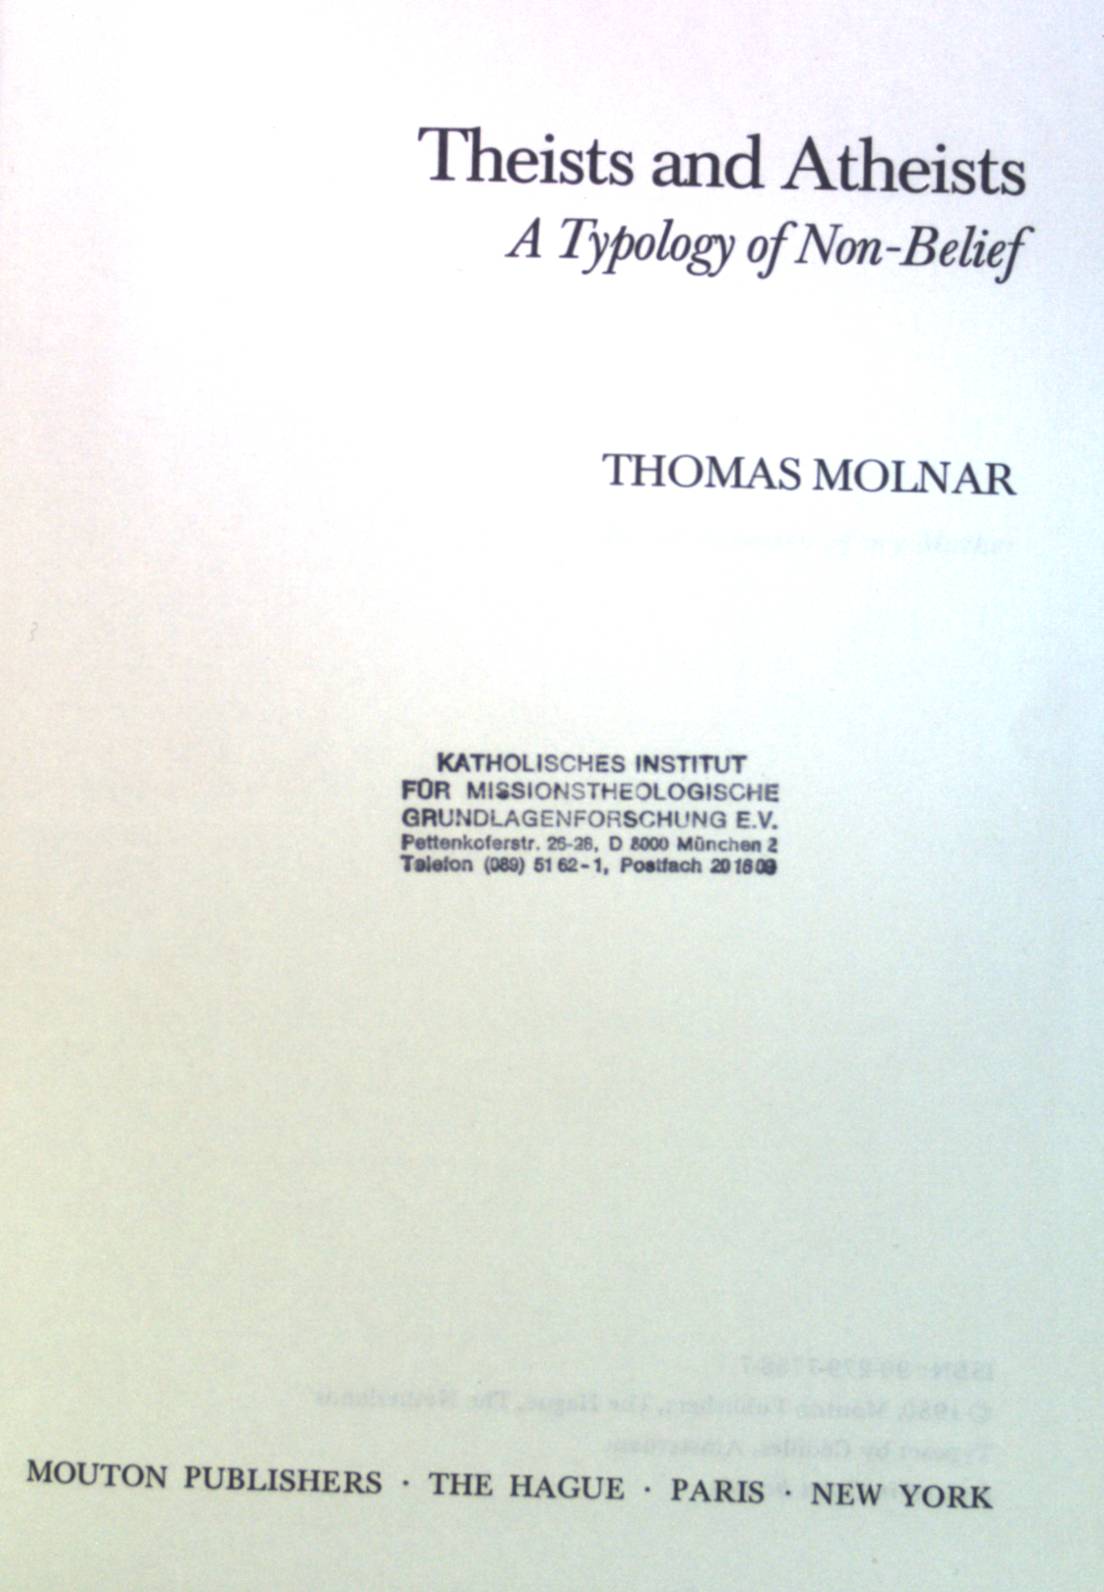 Theists and Atheists: A Typology of Non-Belief. Religion and Reason, Band 18 Auflage: 1 - Molnar, Thomas